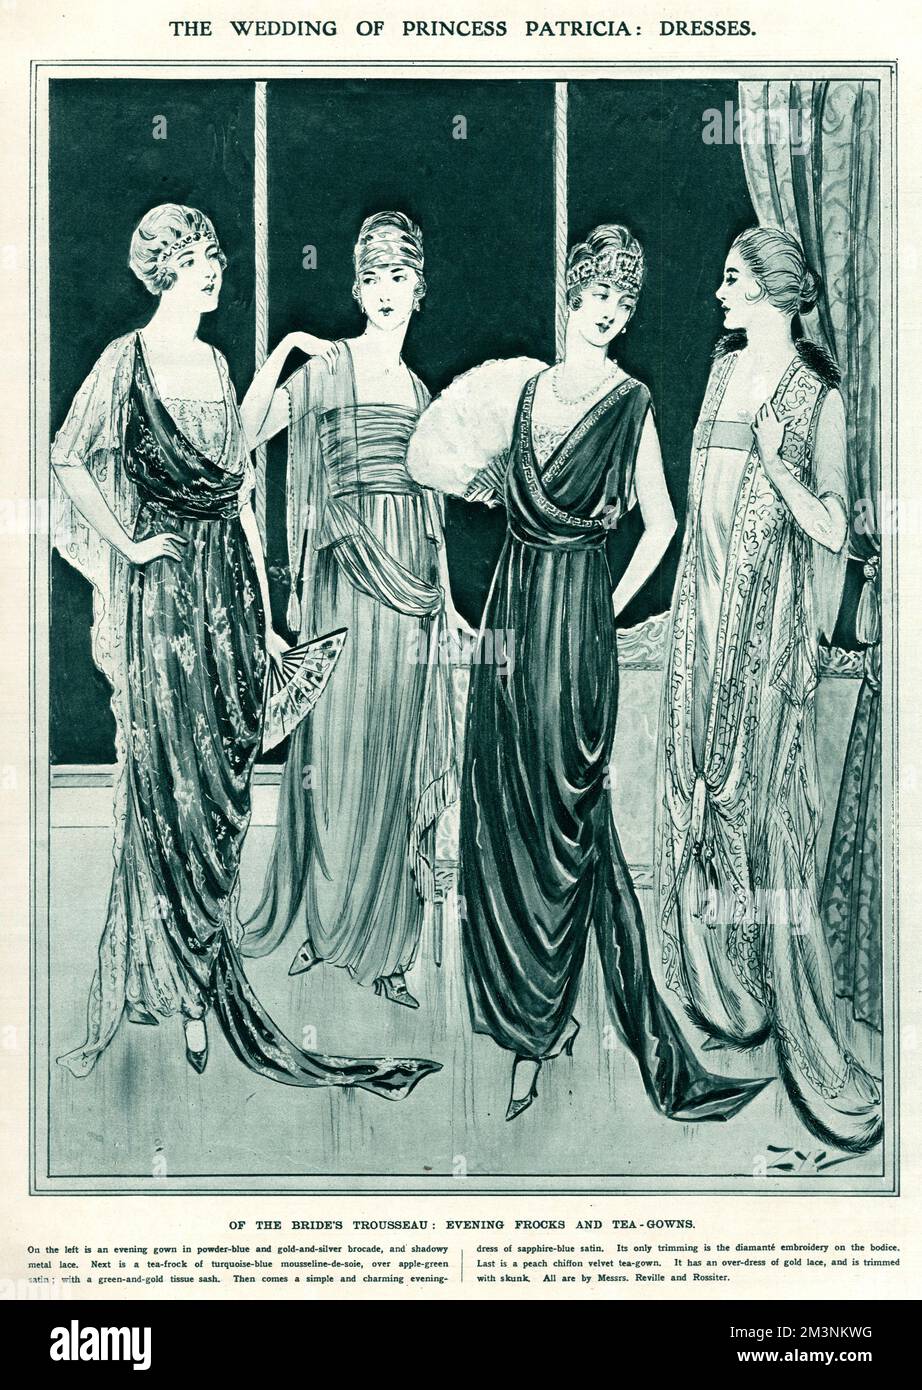 Four items from Princess Patricia of Connaught's trousseau, consisting of evening frocks and tea gowns.  The dresses are, from left to right, an evening gown in powder blue with gold and silver brocade; a tea frock of turquoise blue mousseline de soie over apple green satin; an evening dress of sapphire blue satin; and a peach chiffon velvet tea gown.  All of the dresses were by Messrs Revill and Rossiter.  Princess Patricia, a granddaughter of Queen Victoria, married Commander Alexander Ramsay RN on 27 February 1919.  On her marriage she relinquished her royal title and became Lady Patricia Stock Photo